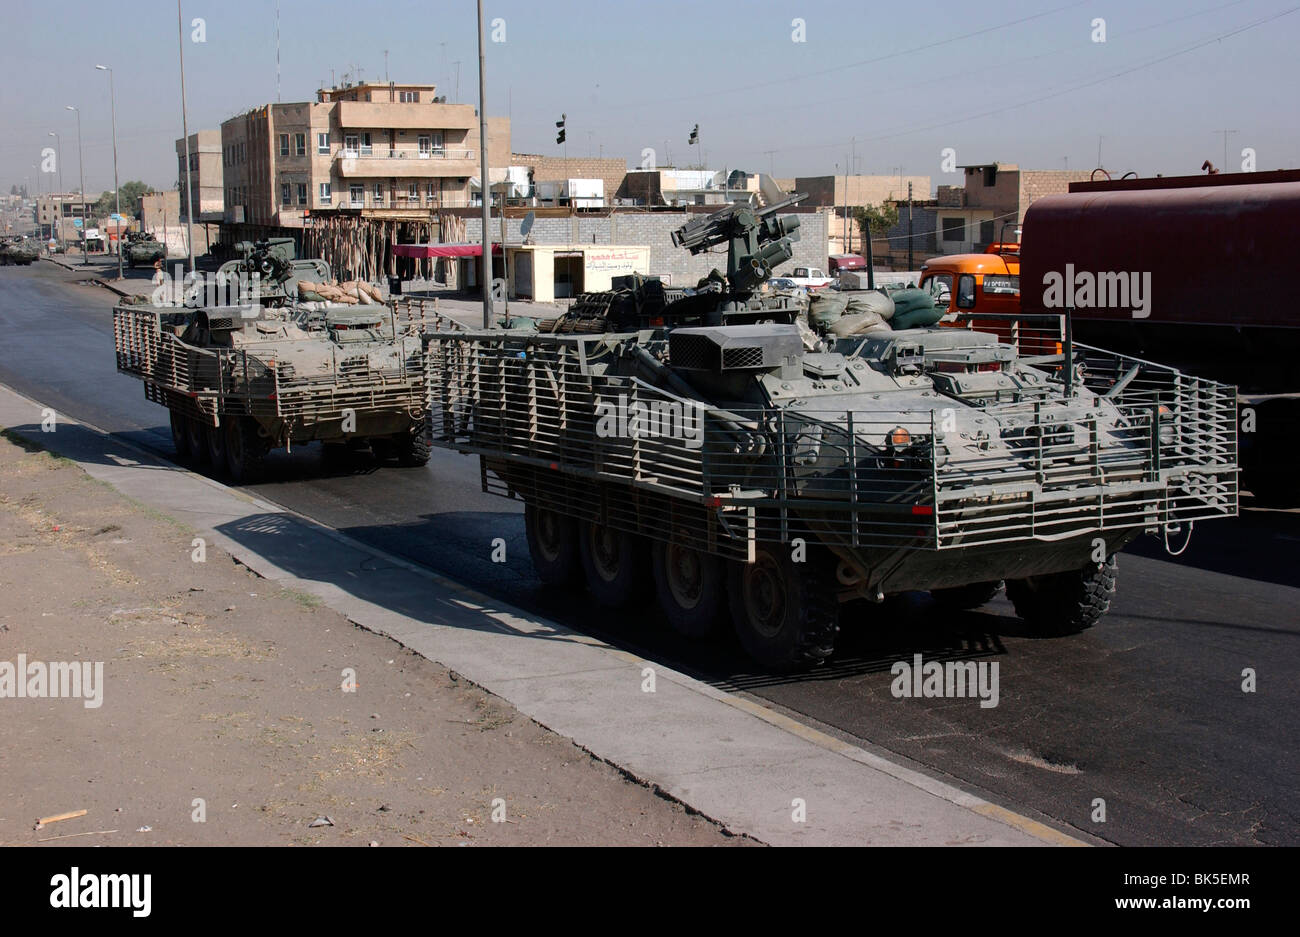 U.S. Army soldiers patrol in Stryker armored wheeled vehicles, Mosul, Iraq Stock Photo